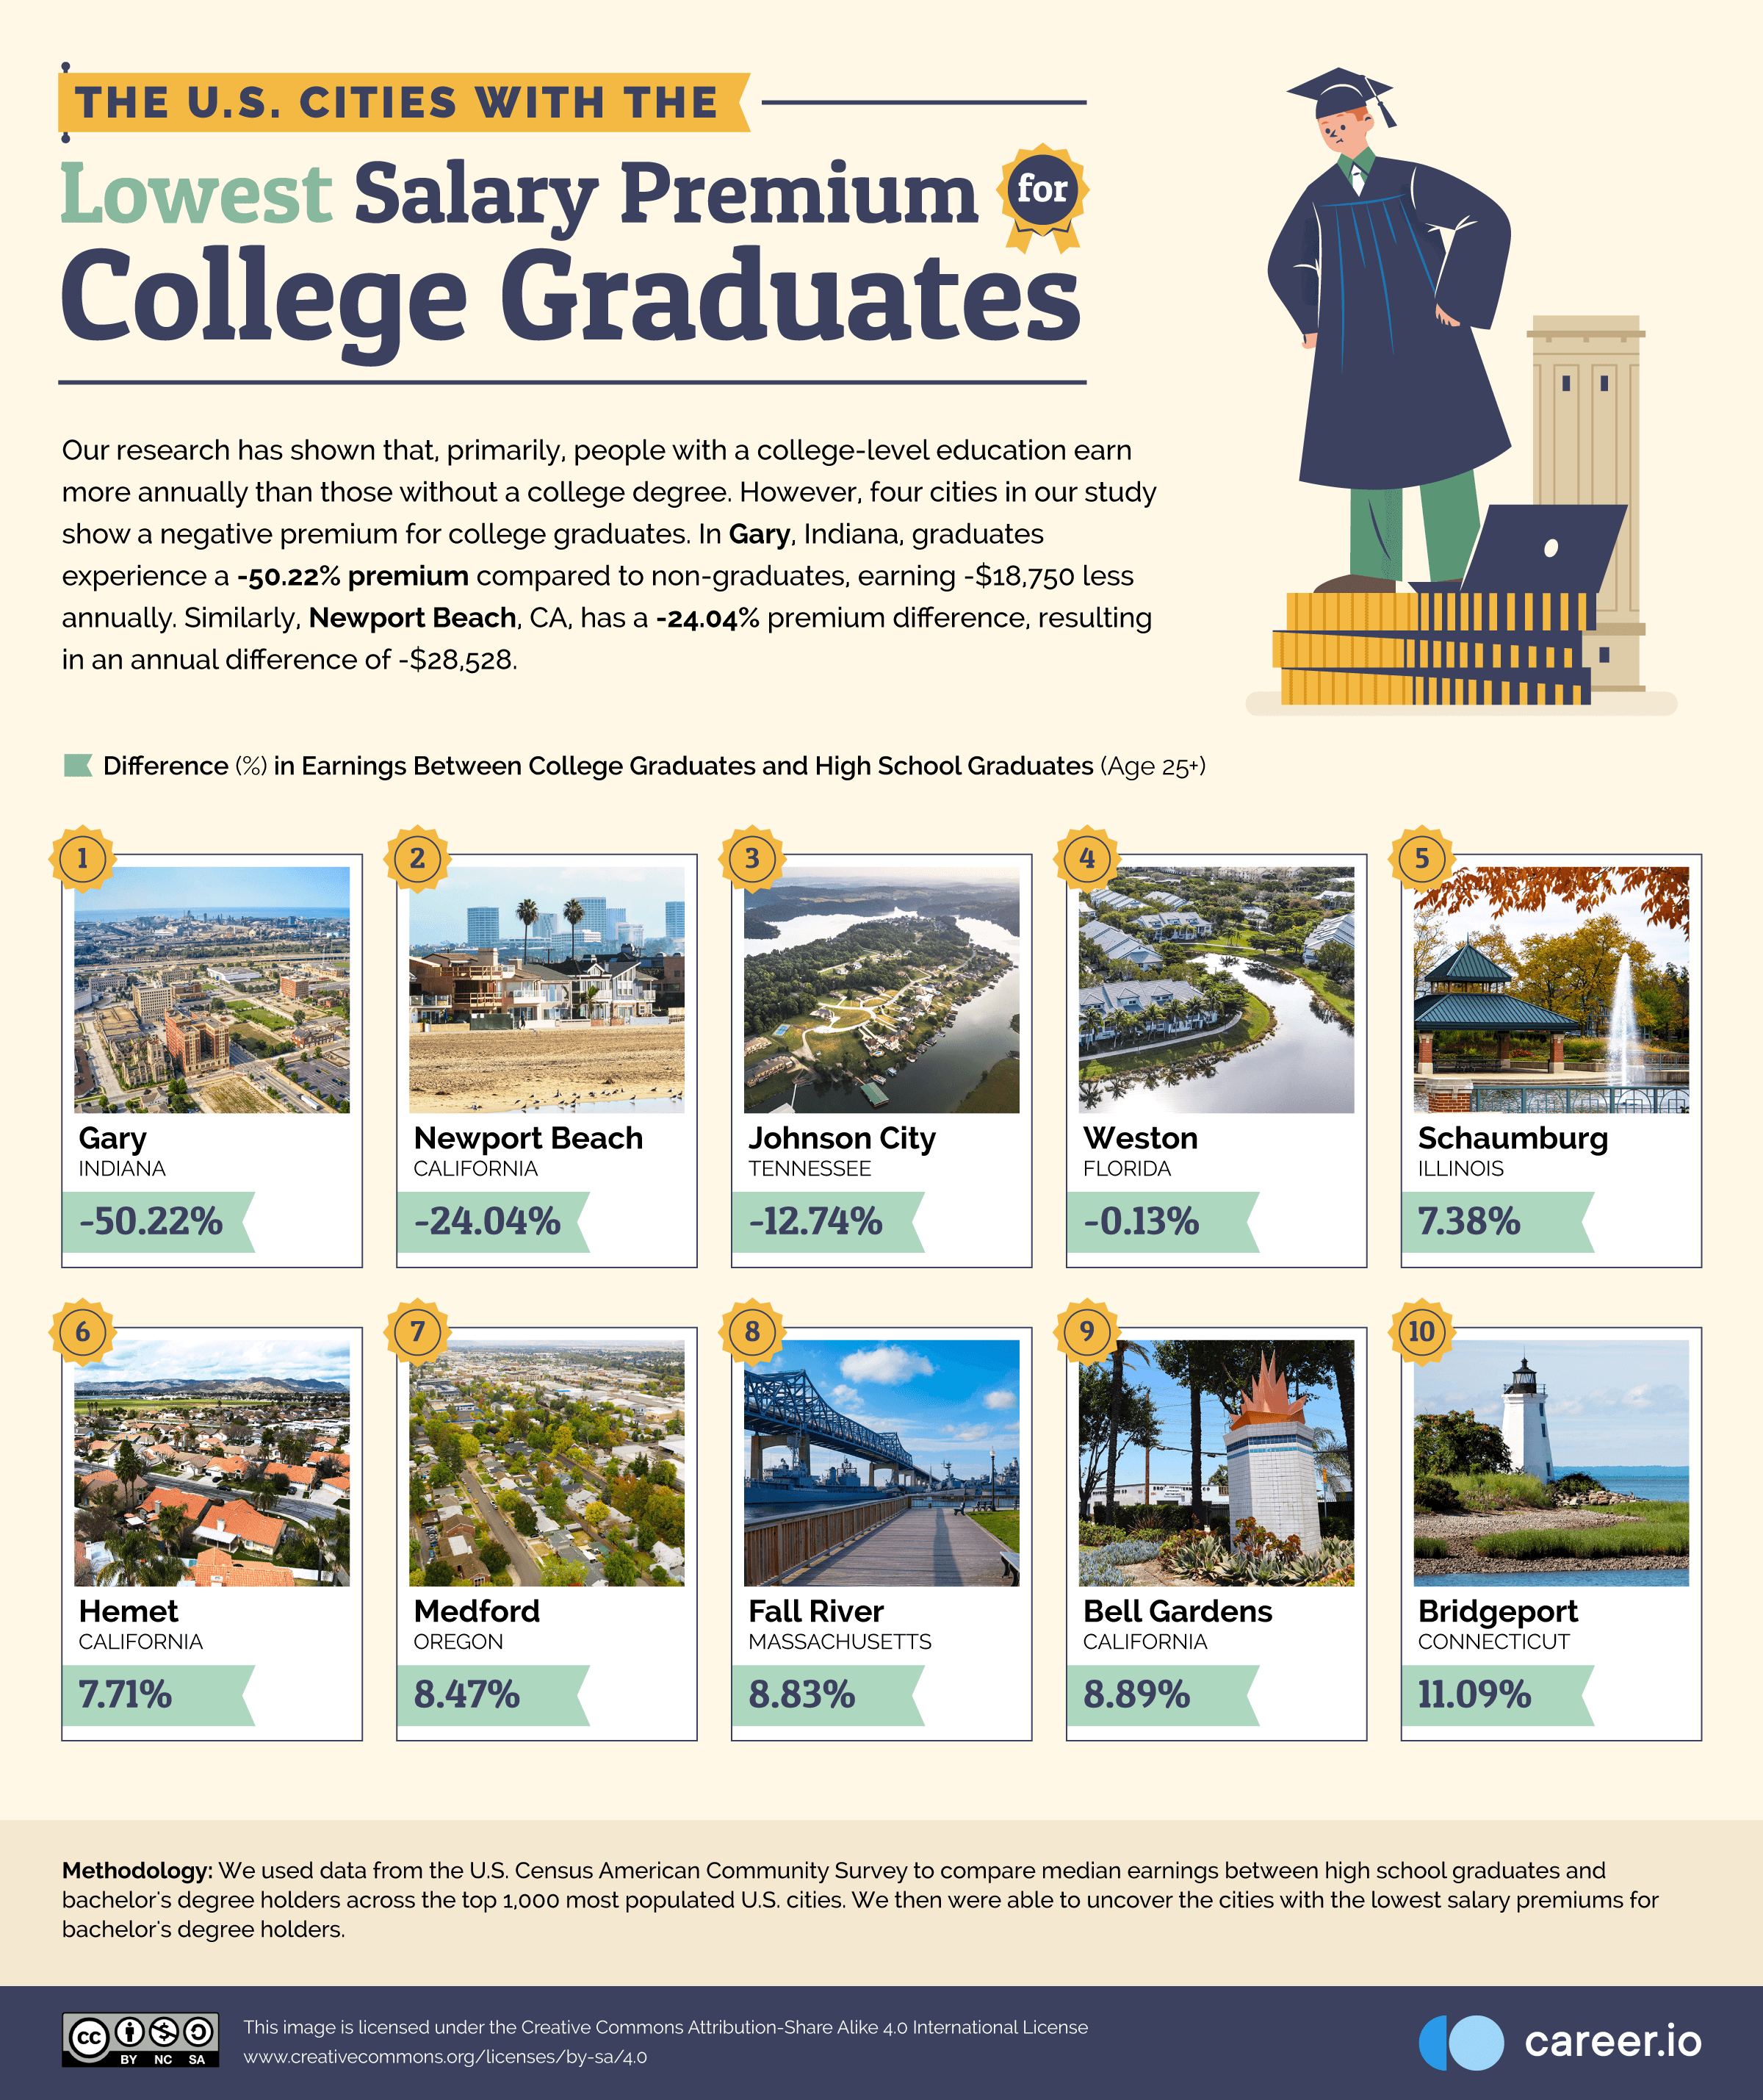 05 The-US-Cities-With-the-Lowest-Salary-Premium-for-College-Graduates